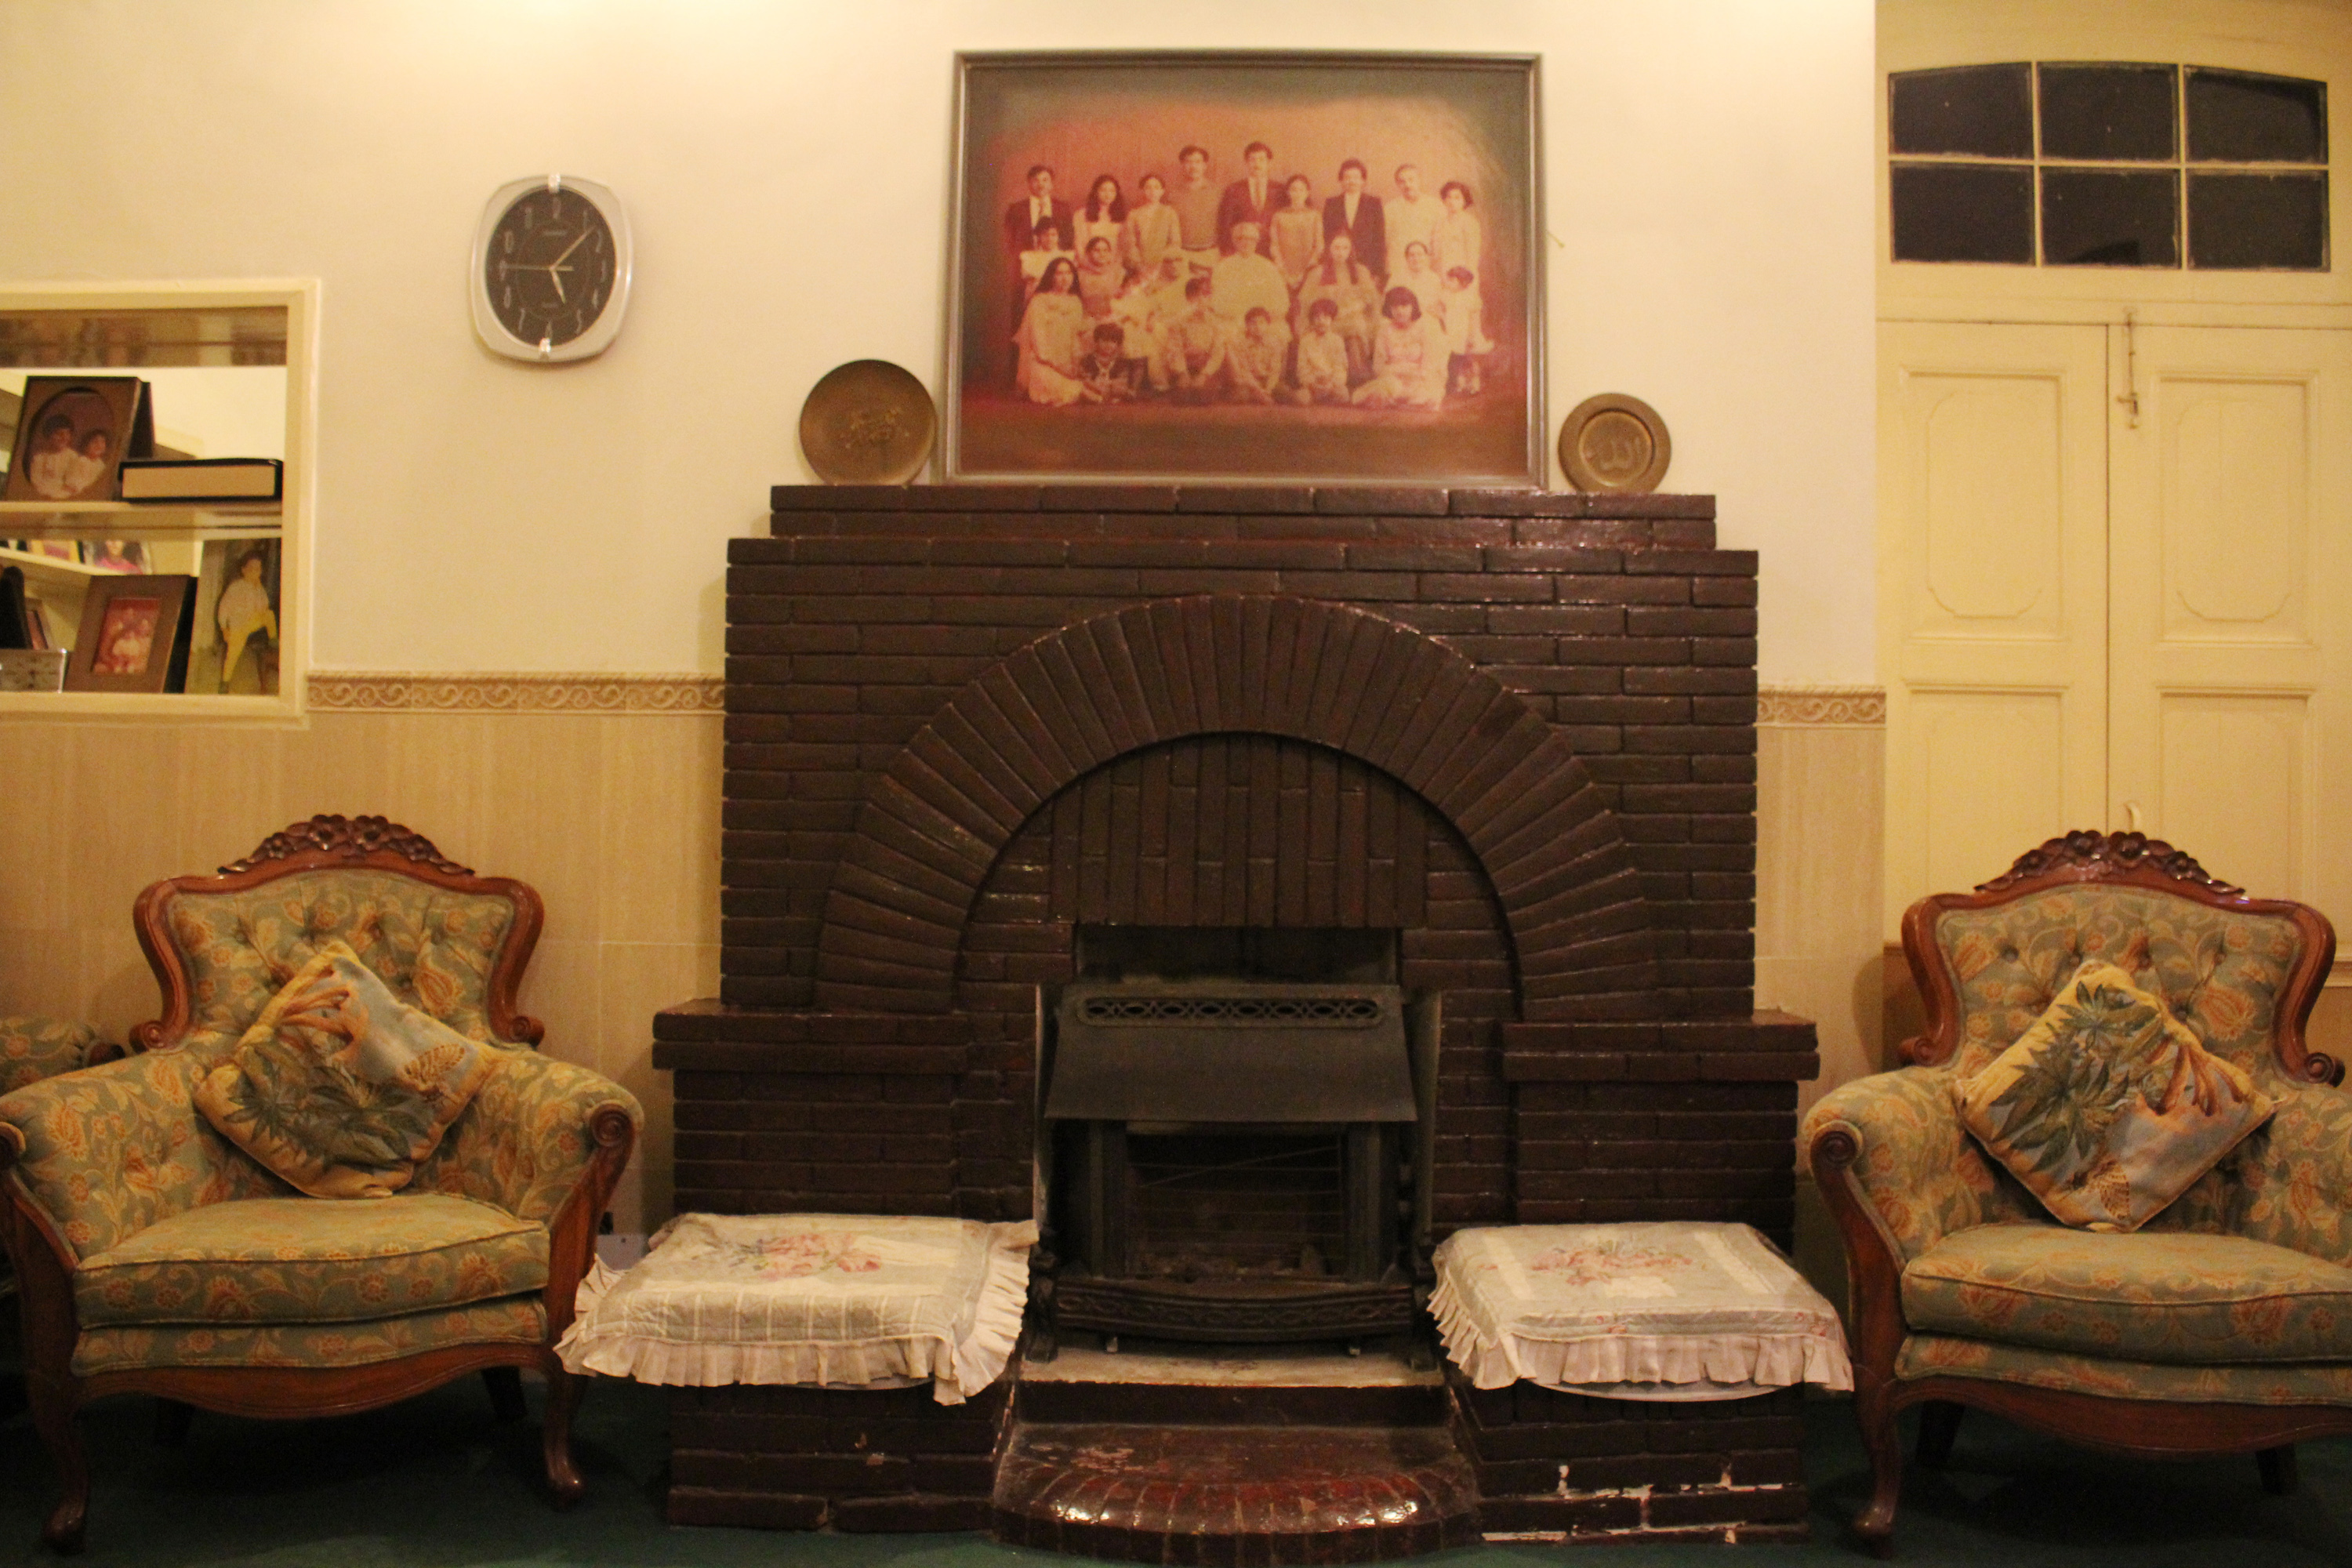 Original-fireplace-since-bought-by-the-family.jpg